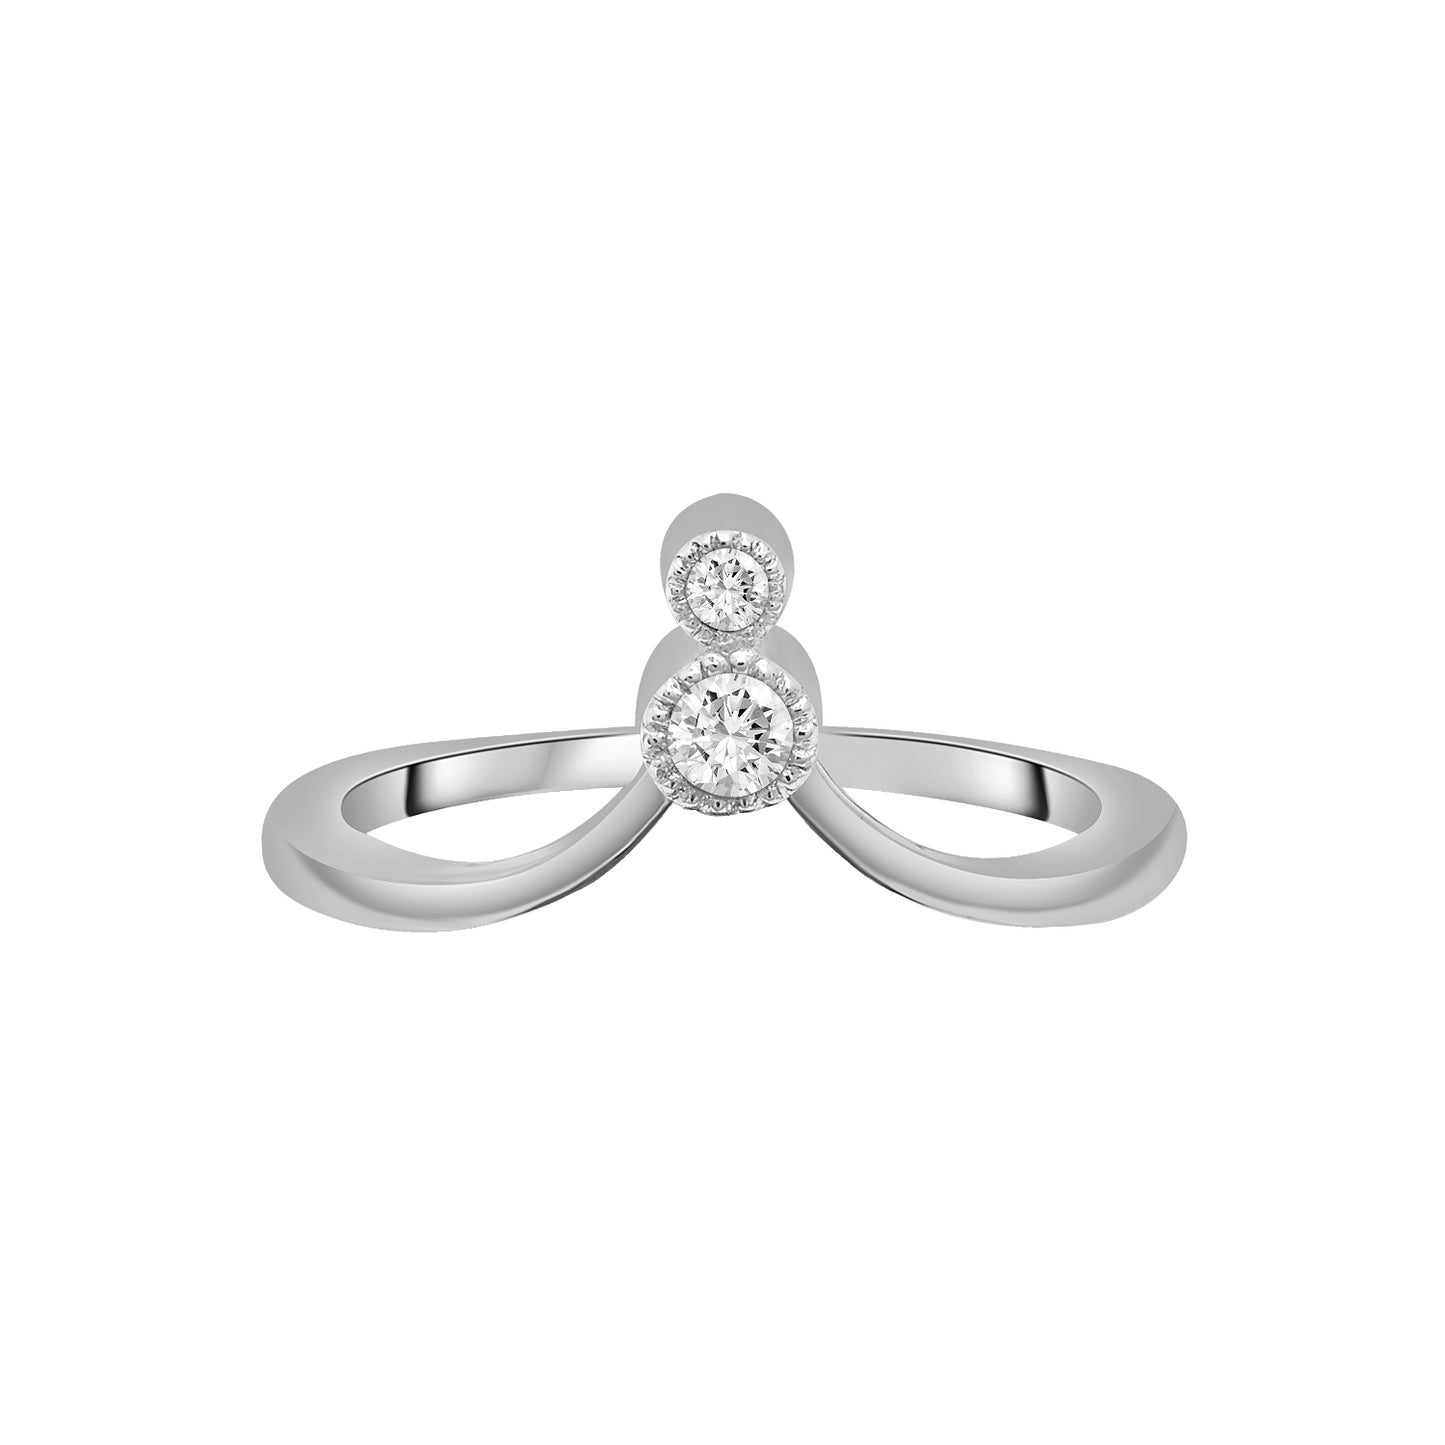 Heluviee Arched Diamond Ring In Silver